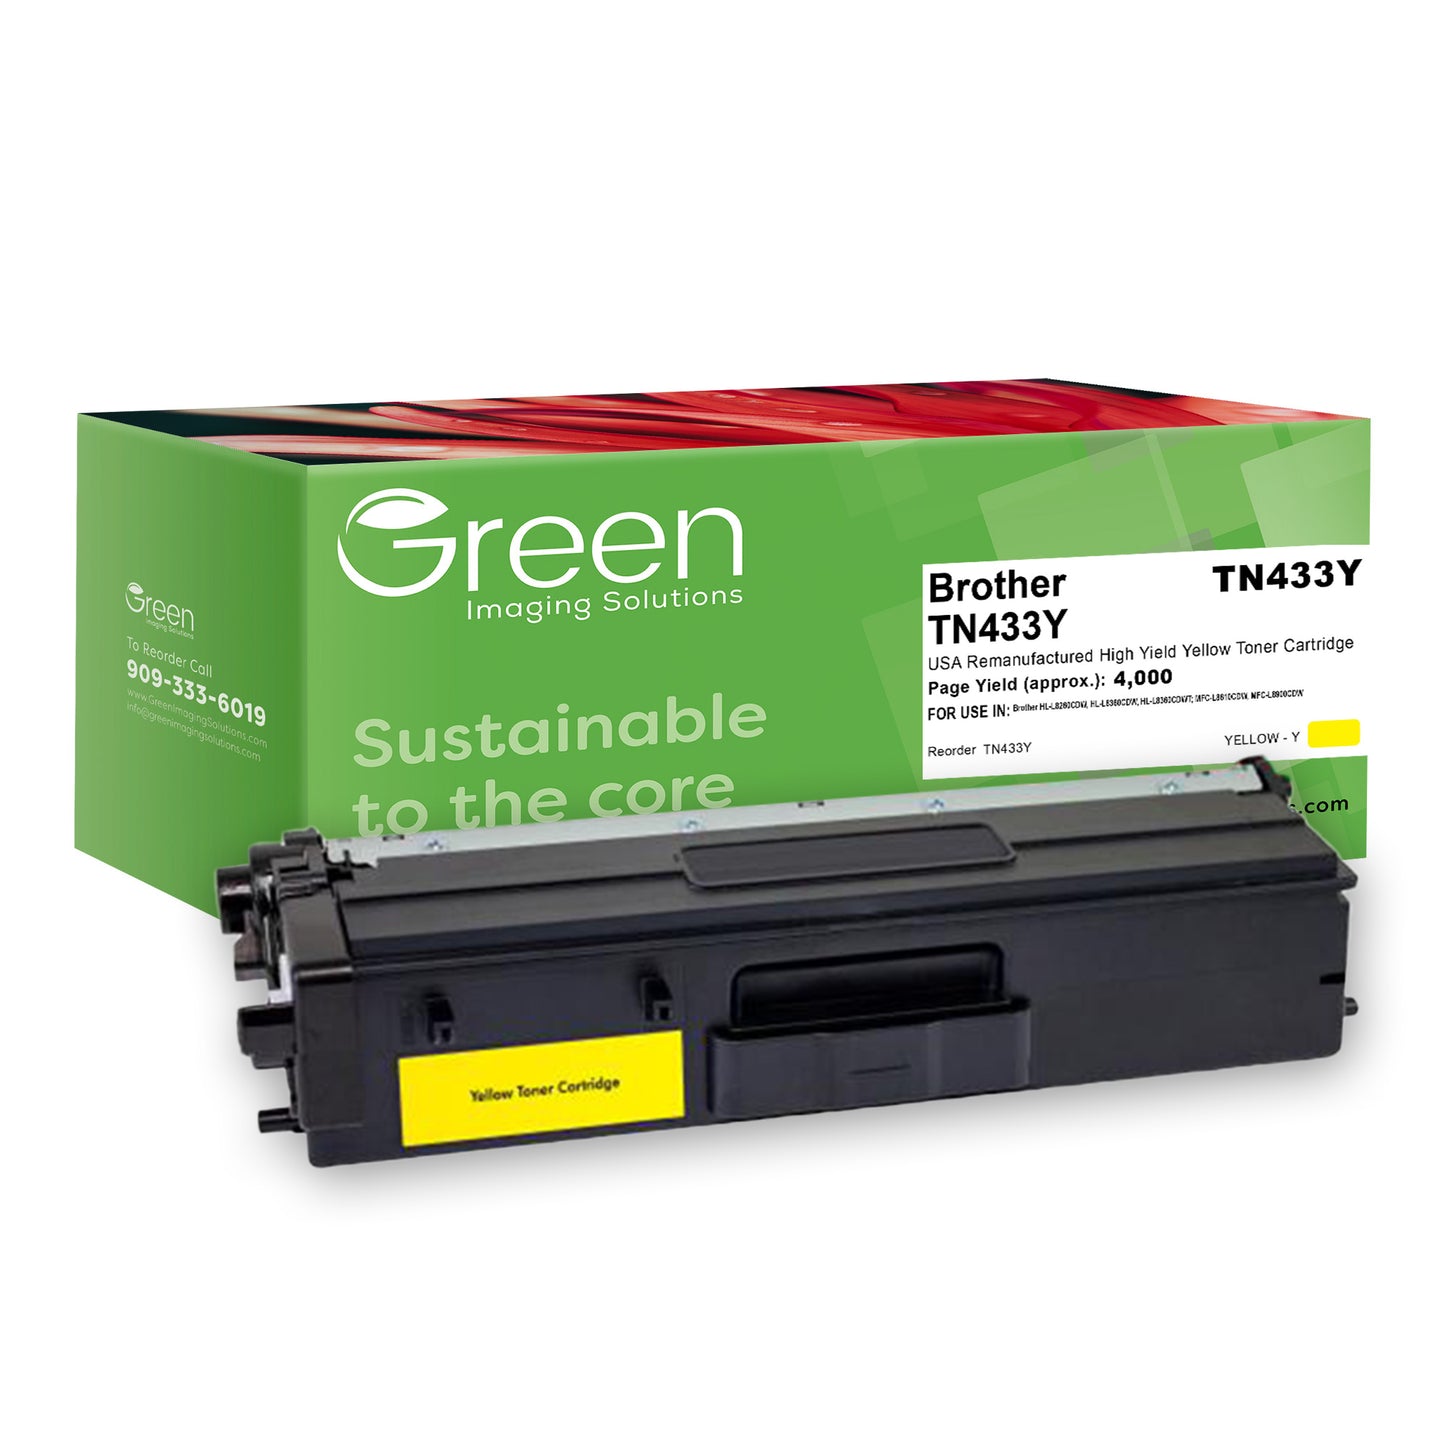 Green Imaging Solutions USA Remanufactured High Yield Yellow Toner Cartridge for Brother TN433Y